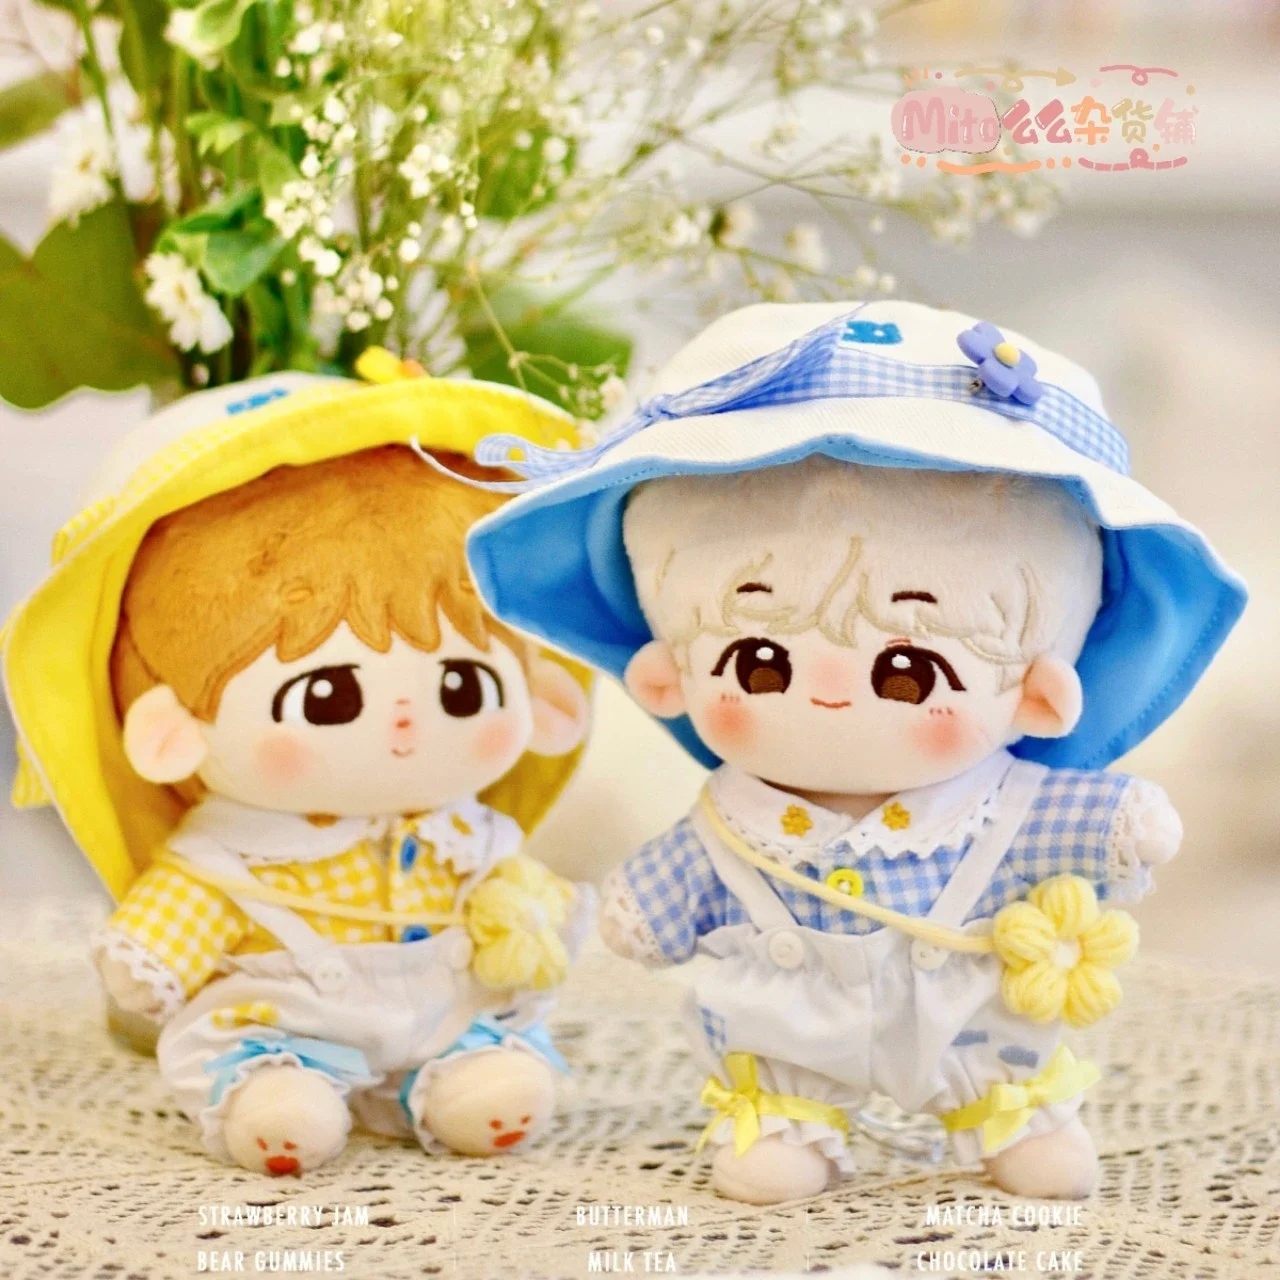 (In Stock) Mito Momo grocery store cotton baby clothes 15 20cm Springfield flowers and autumn equinox fruit set